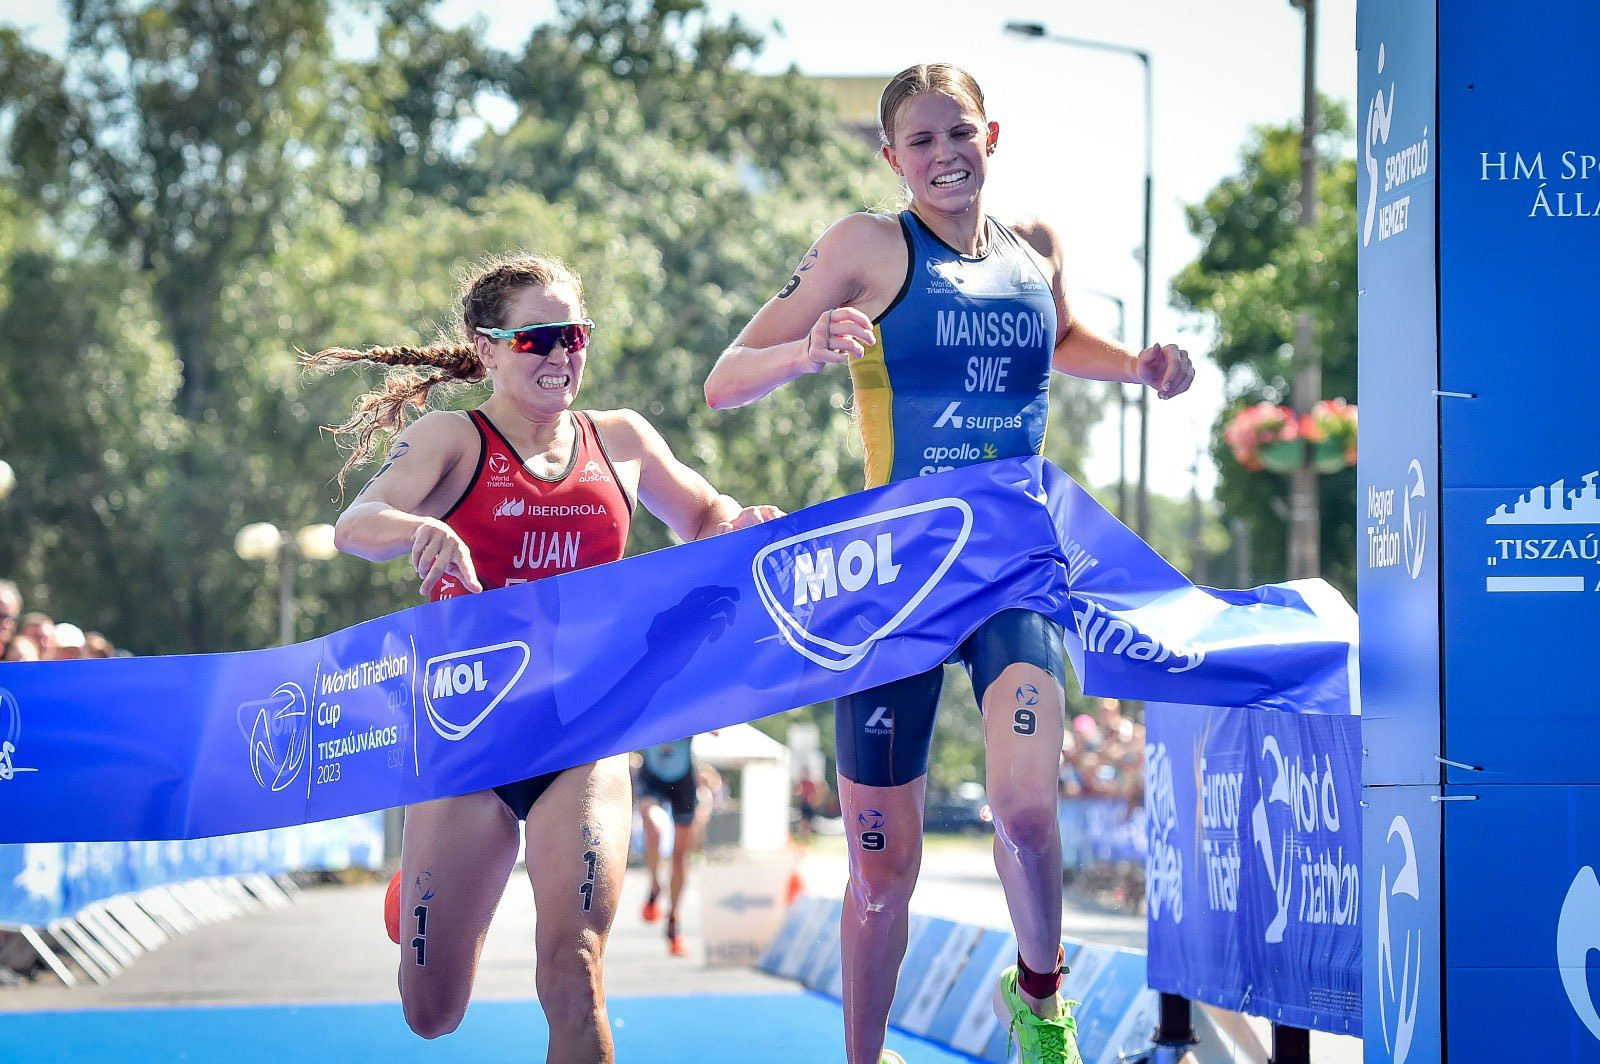 Månsson and Lehmann produce blistering runs to take World Triathlon Cup golds